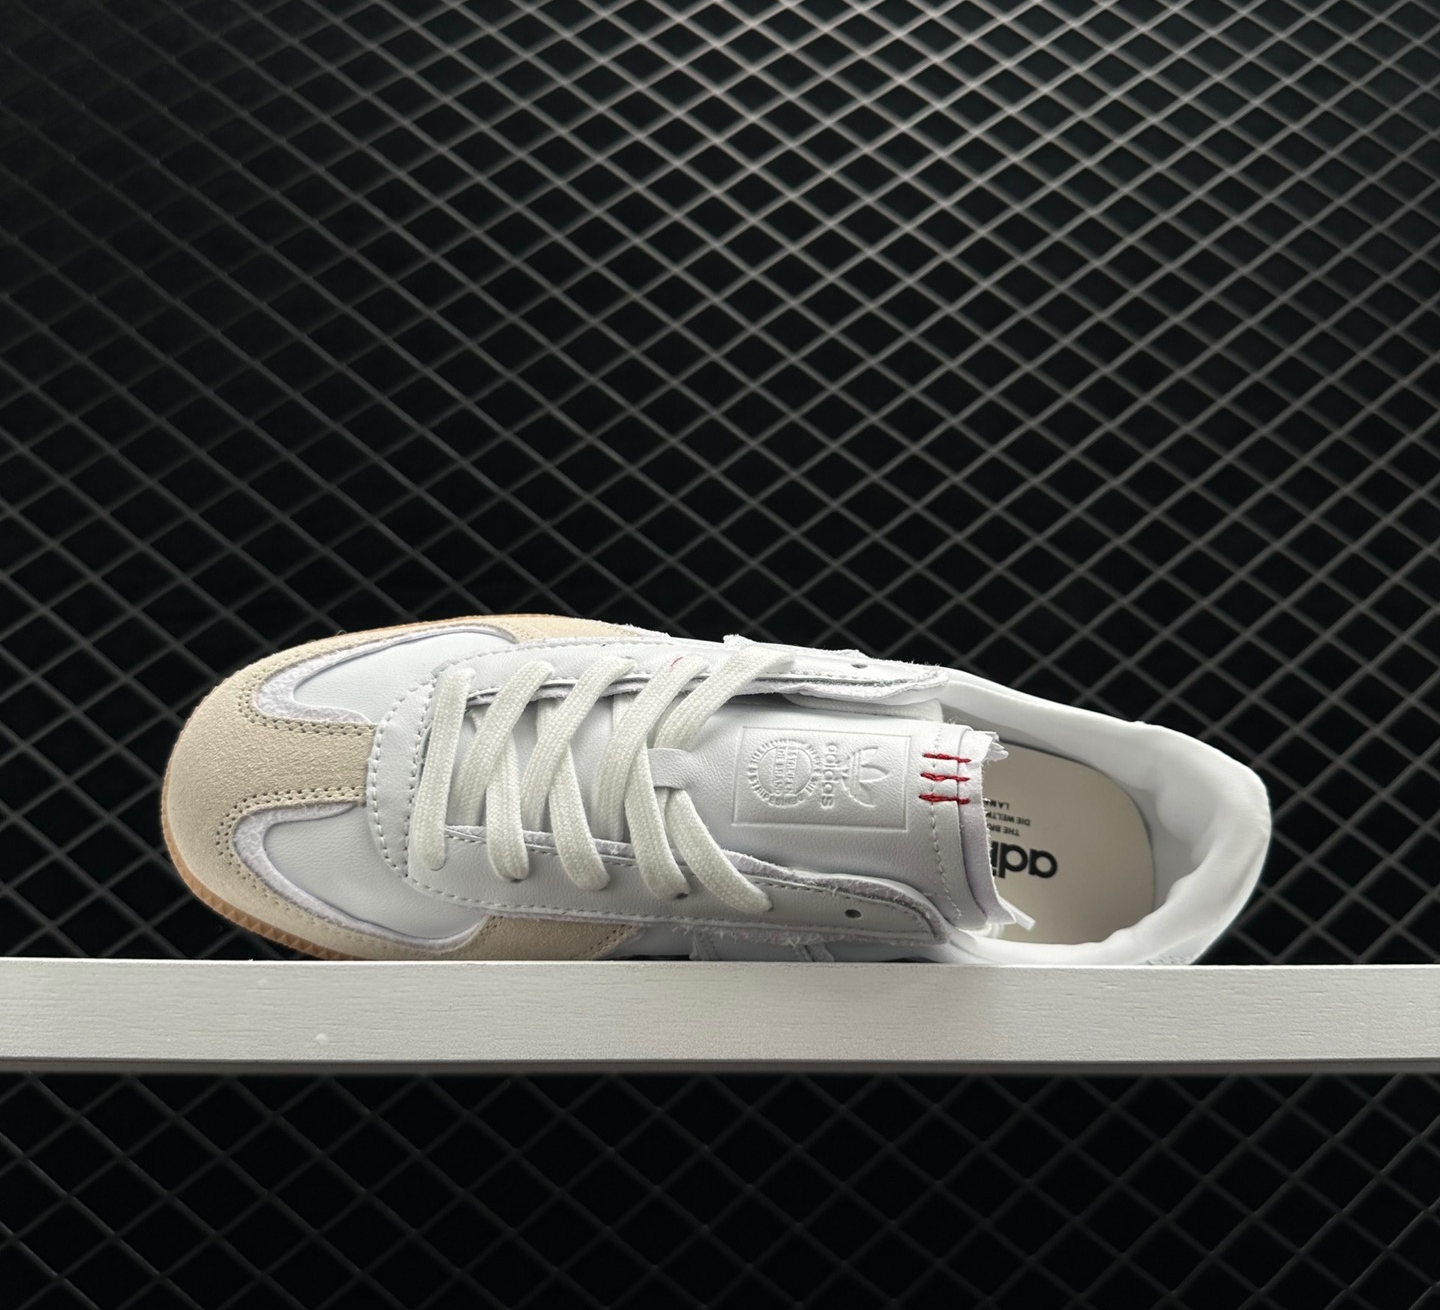 Adidas Originals Bw Army White HQ8512 - Iconic Retro Sneakers at Their Best